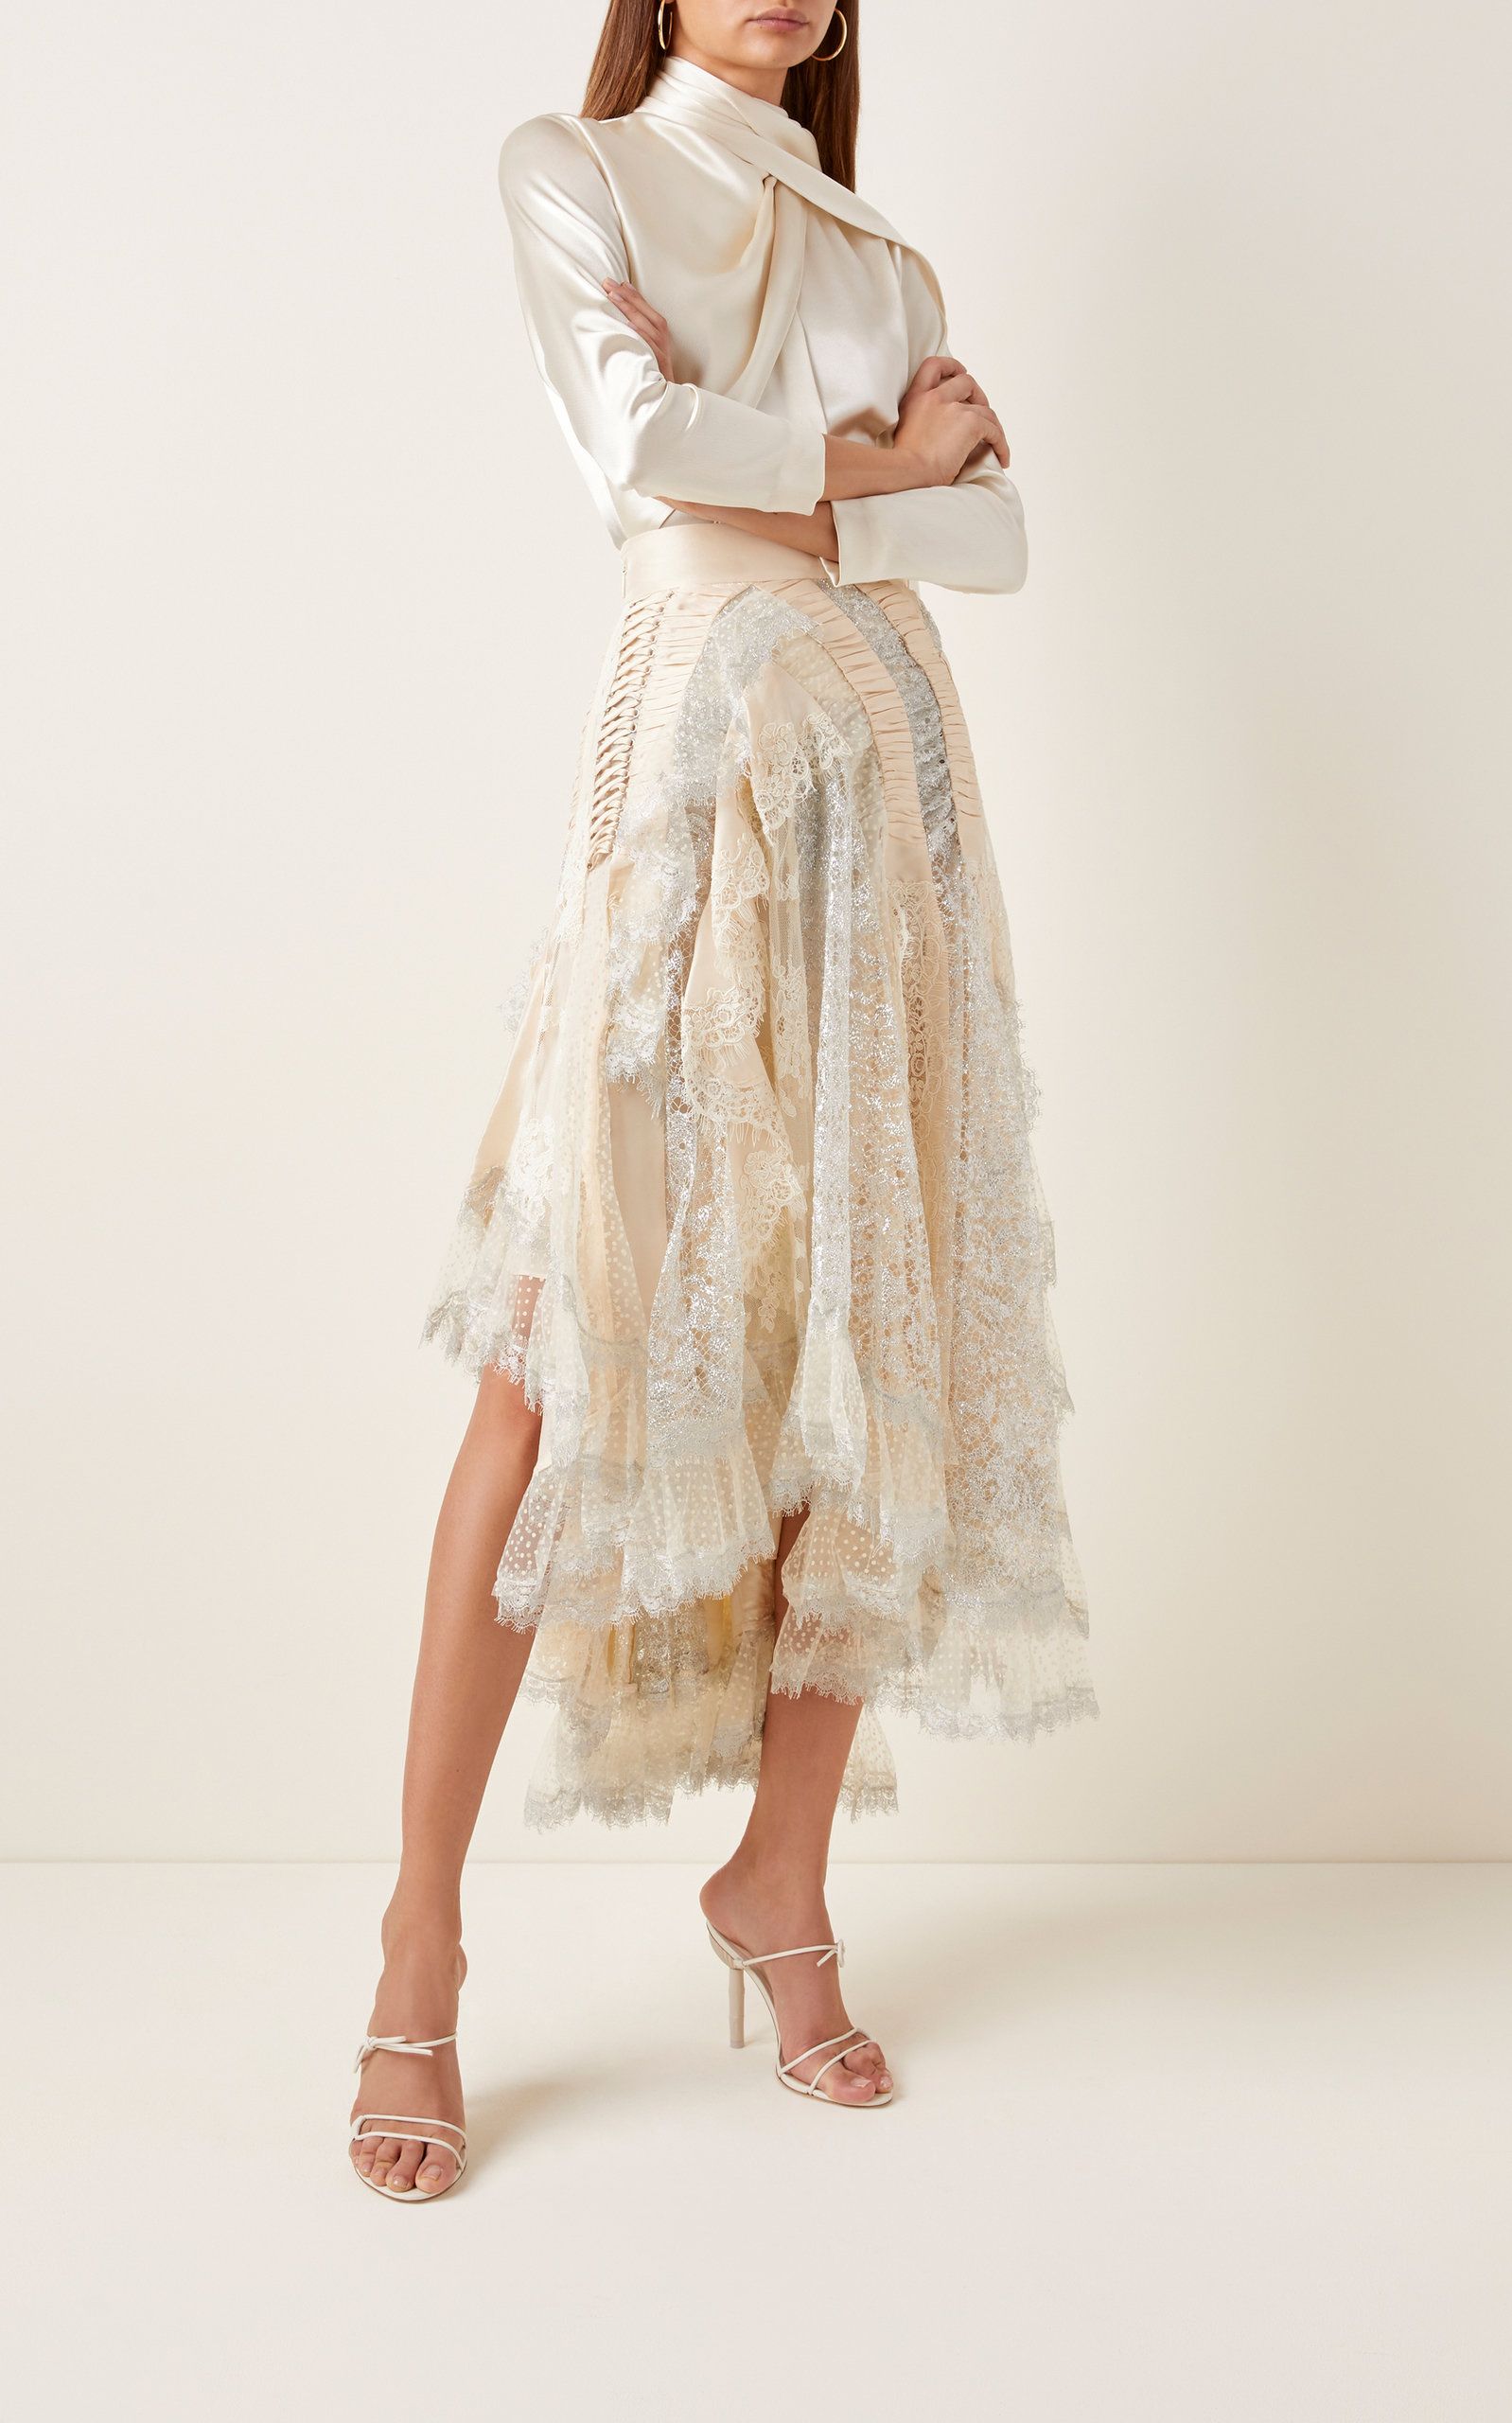 Chiffon Skirts: Light and Airy Staples for Summer